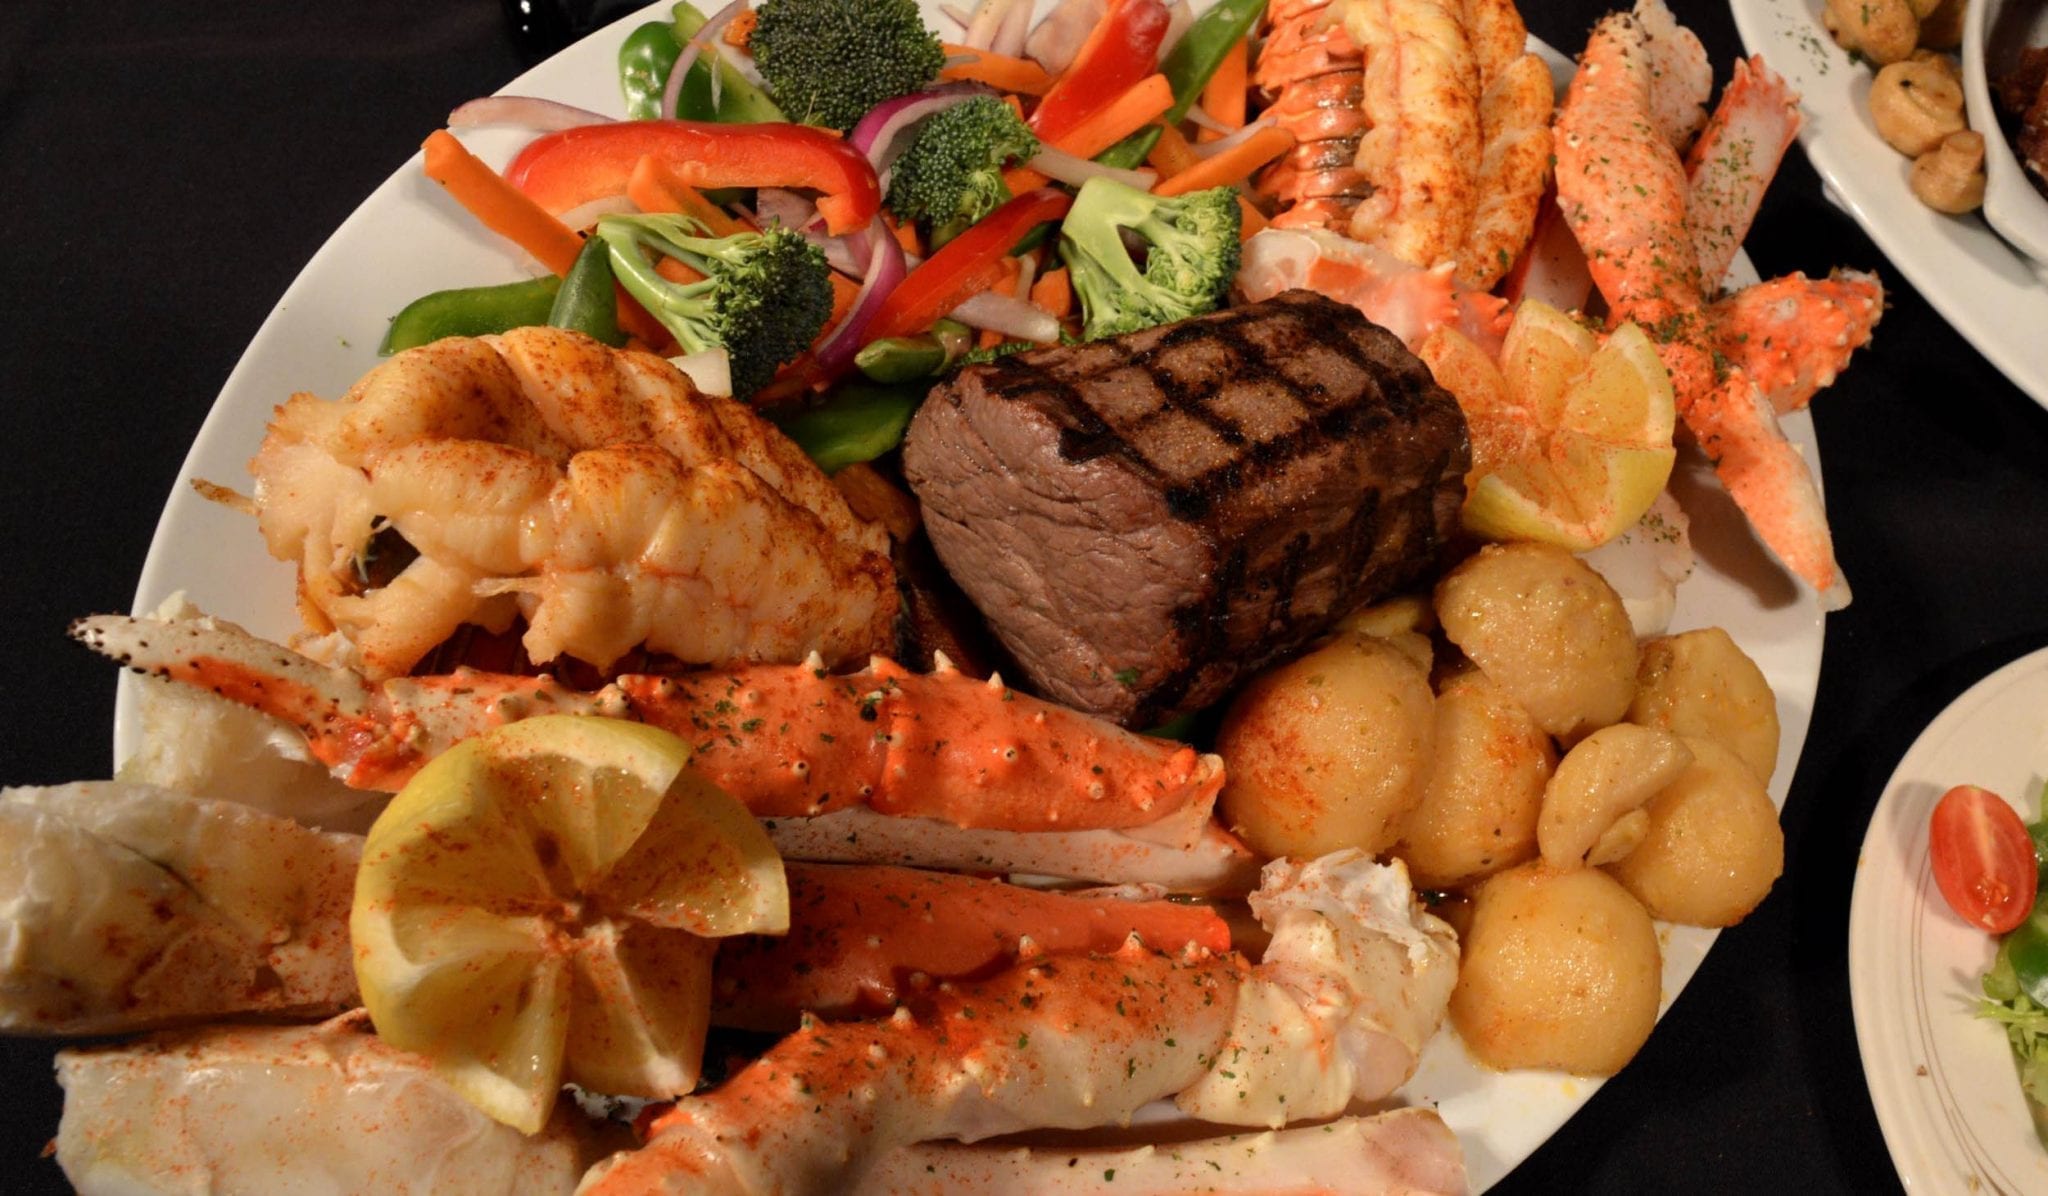 Surf and turf platter